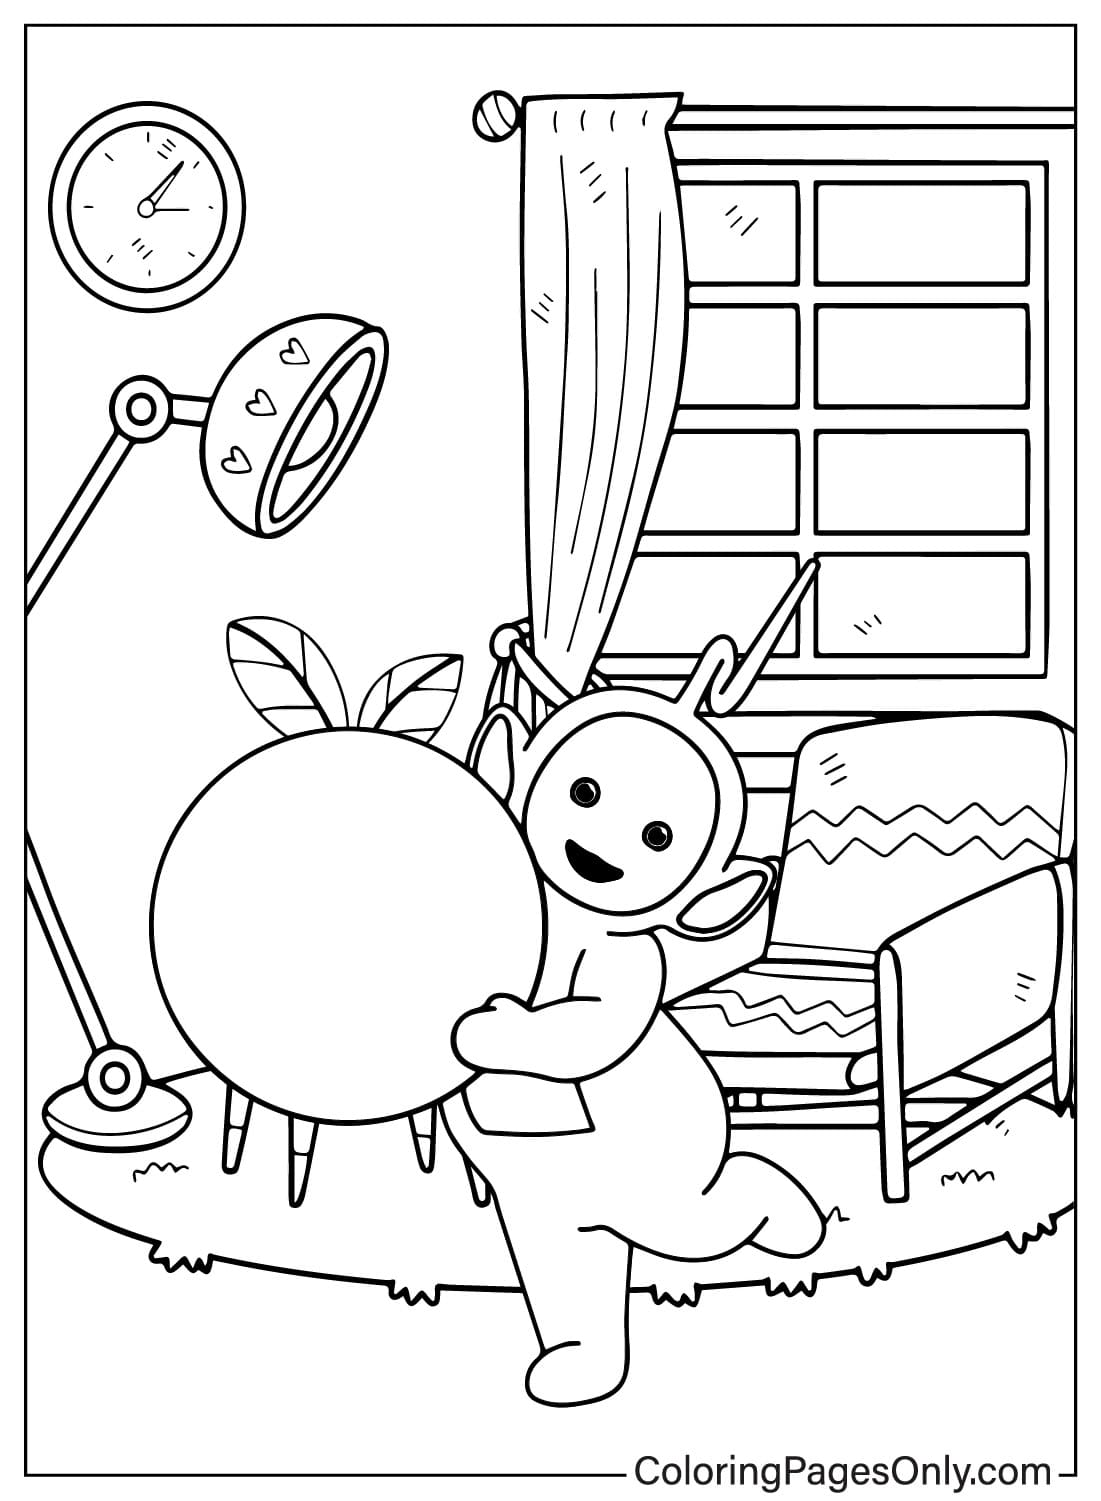 Laa-Laa Coloring Page Printable from Teletubbies - WildBrain